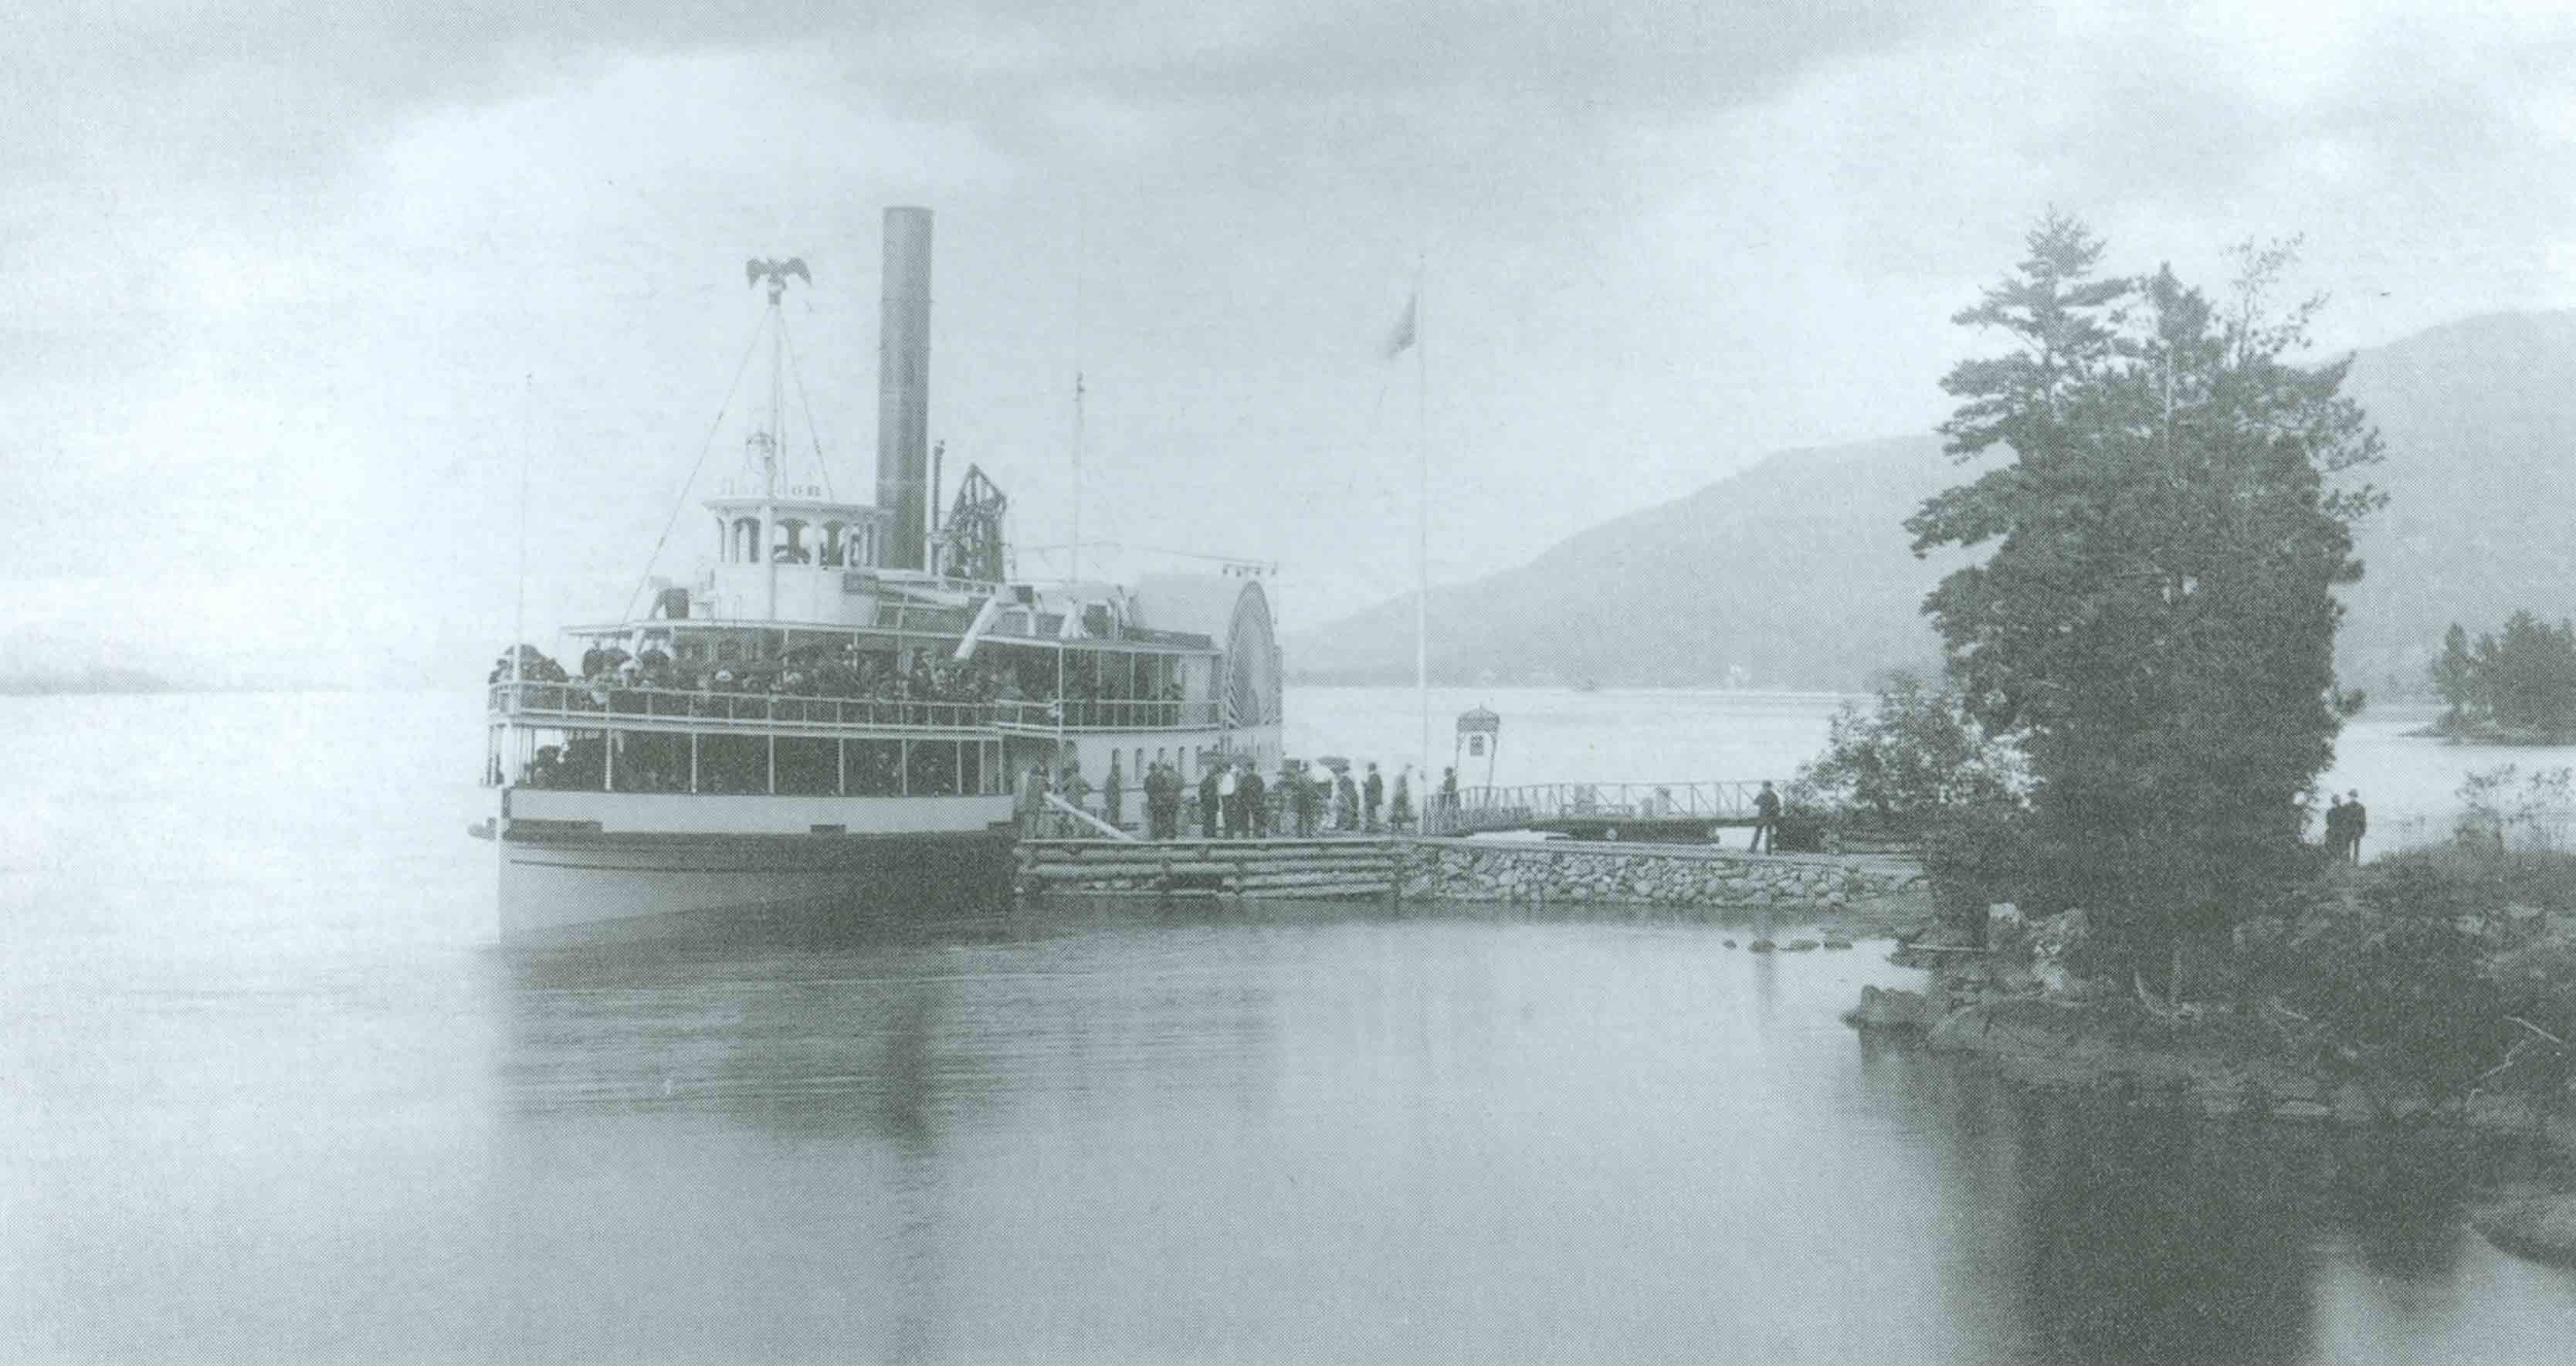 The Horicon at the Huletts Dock, c. 1880, S. R. Stoddard